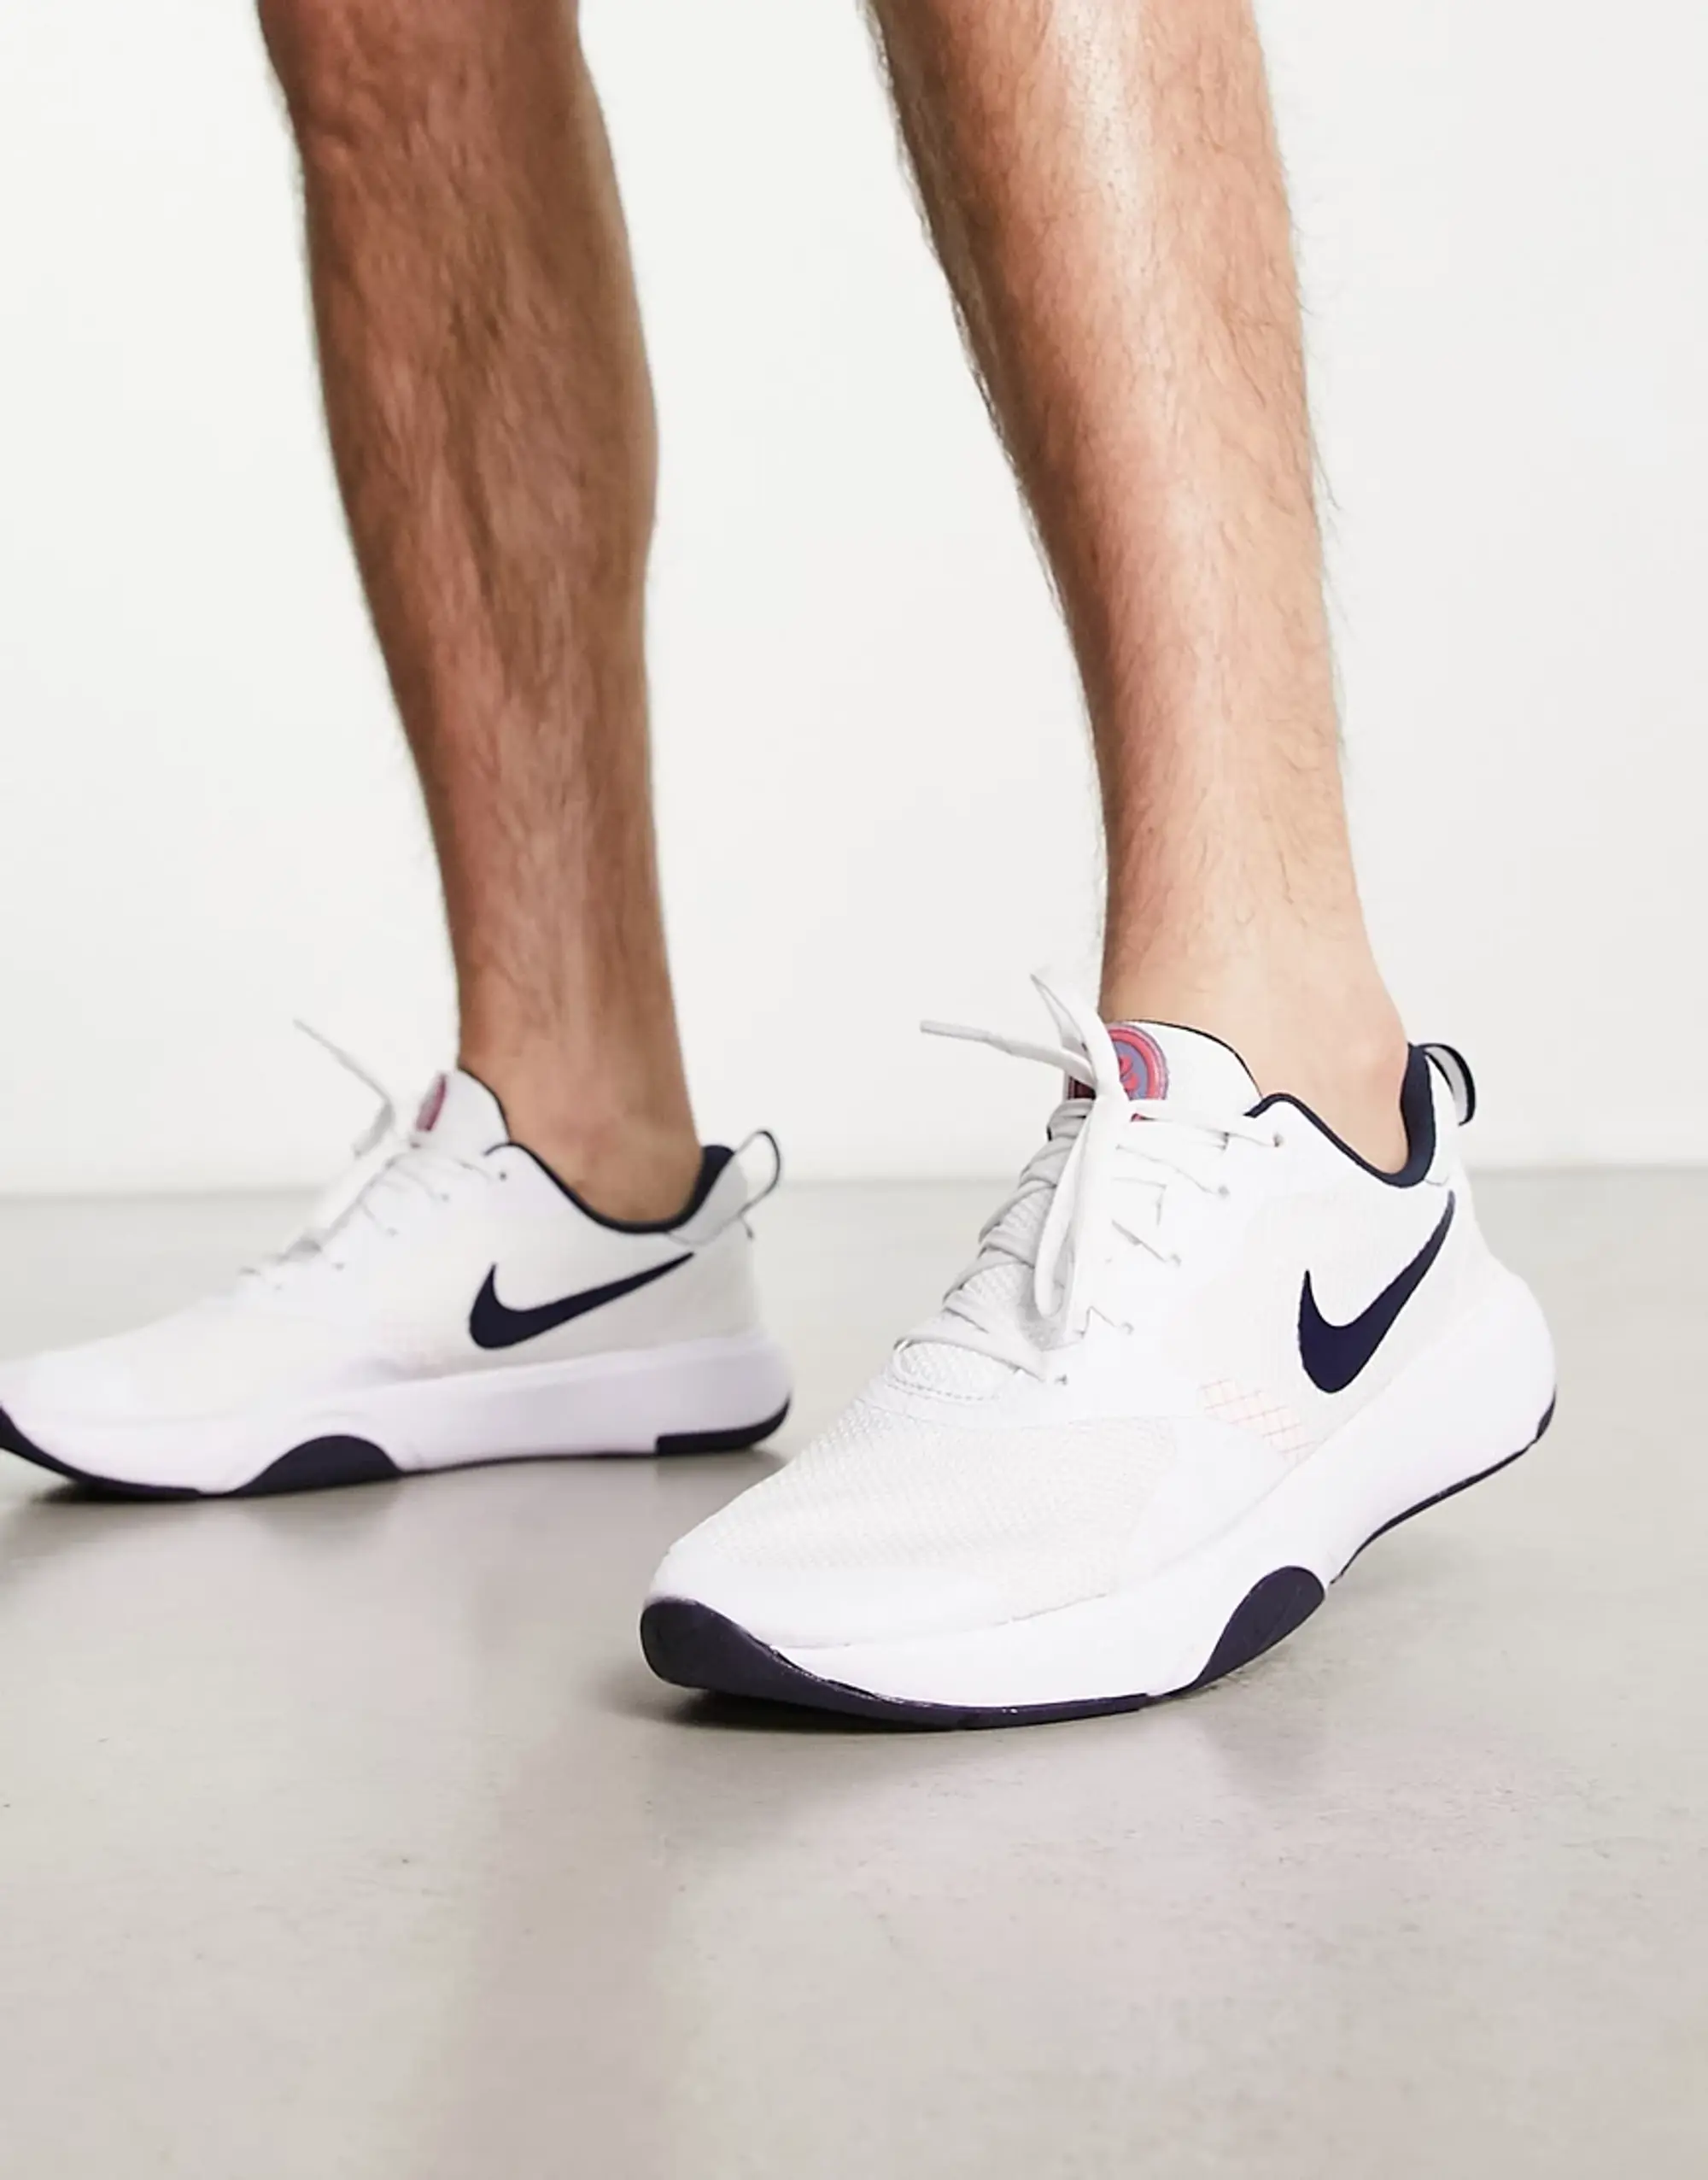 Nike Training City Rep Trainer In White